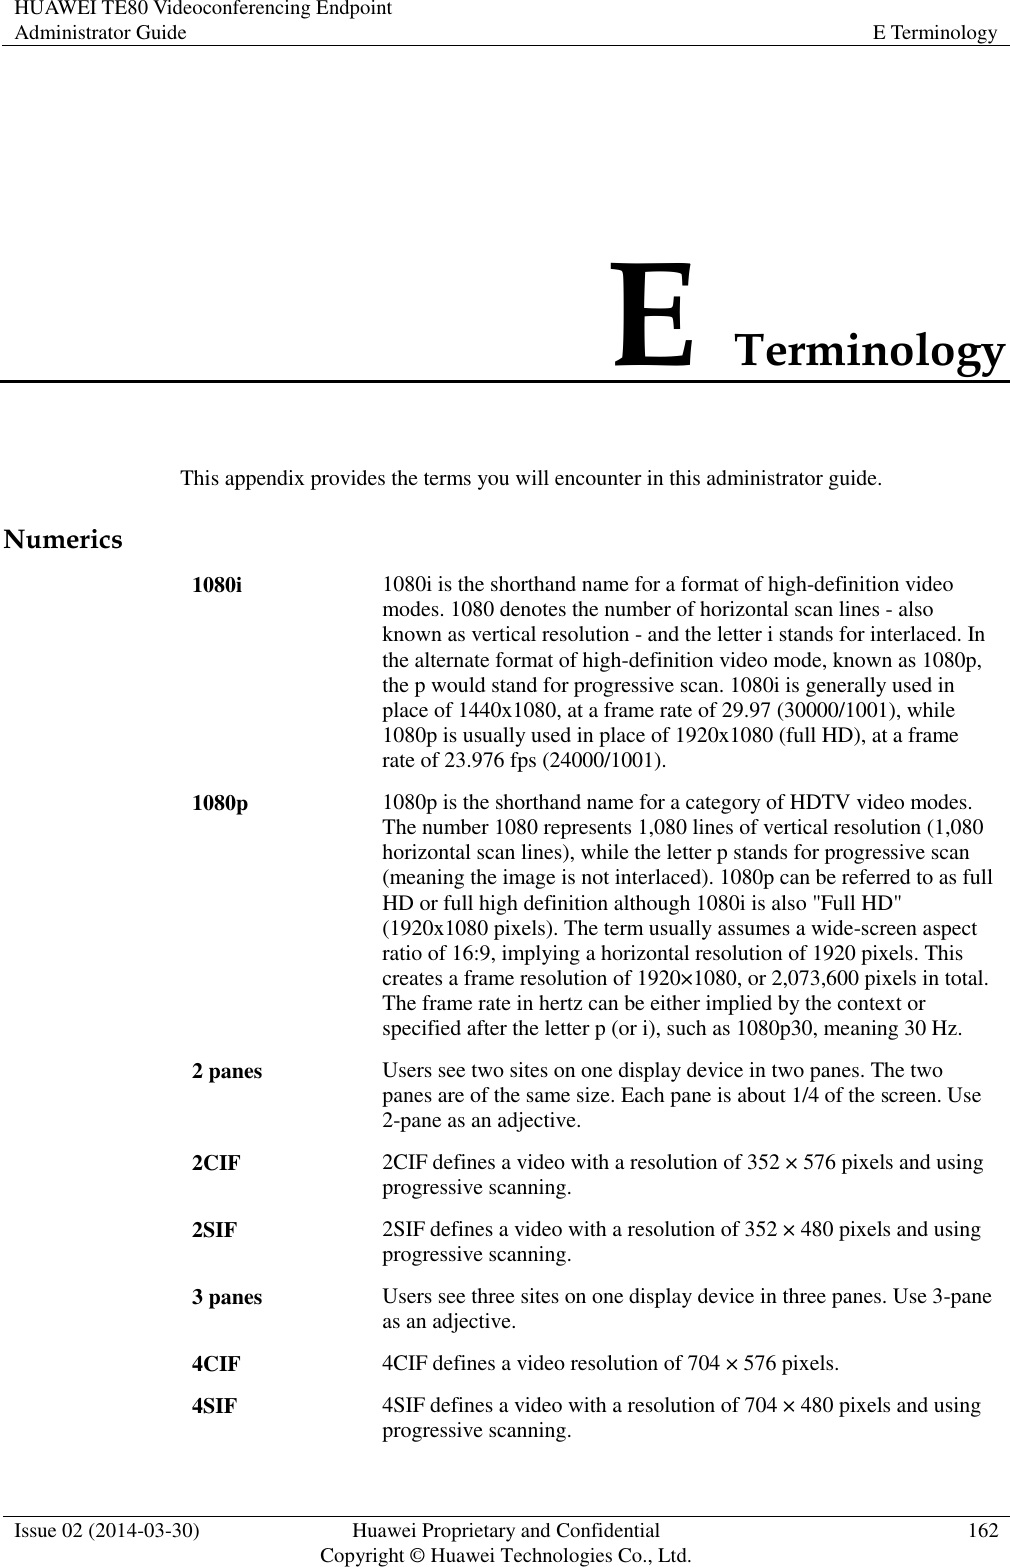 HUAWEI TE80 Videoconferencing Endpoint Administrator Guide E Terminology  Issue 02 (2014-03-30) Huawei Proprietary and Confidential Copyright © Huawei Technologies Co., Ltd. 162  E Terminology This appendix provides the terms you will encounter in this administrator guide. Numerics 1080i 1080i is the shorthand name for a format of high-definition video modes. 1080 denotes the number of horizontal scan lines - also known as vertical resolution - and the letter i stands for interlaced. In the alternate format of high-definition video mode, known as 1080p, the p would stand for progressive scan. 1080i is generally used in place of 1440x1080, at a frame rate of 29.97 (30000/1001), while 1080p is usually used in place of 1920x1080 (full HD), at a frame rate of 23.976 fps (24000/1001). 1080p 1080p is the shorthand name for a category of HDTV video modes. The number 1080 represents 1,080 lines of vertical resolution (1,080 horizontal scan lines), while the letter p stands for progressive scan (meaning the image is not interlaced). 1080p can be referred to as full HD or full high definition although 1080i is also &quot;Full HD&quot; (1920x1080 pixels). The term usually assumes a wide-screen aspect ratio of 16:9, implying a horizontal resolution of 1920 pixels. This creates a frame resolution of 1920×1080, or 2,073,600 pixels in total. The frame rate in hertz can be either implied by the context or specified after the letter p (or i), such as 1080p30, meaning 30 Hz. 2 panes Users see two sites on one display device in two panes. The two panes are of the same size. Each pane is about 1/4 of the screen. Use 2-pane as an adjective. 2CIF 2CIF defines a video with a resolution of 352 × 576 pixels and using progressive scanning. 2SIF 2SIF defines a video with a resolution of 352 × 480 pixels and using progressive scanning. 3 panes Users see three sites on one display device in three panes. Use 3-pane as an adjective. 4CIF 4CIF defines a video resolution of 704 × 576 pixels. 4SIF 4SIF defines a video with a resolution of 704 × 480 pixels and using progressive scanning. 